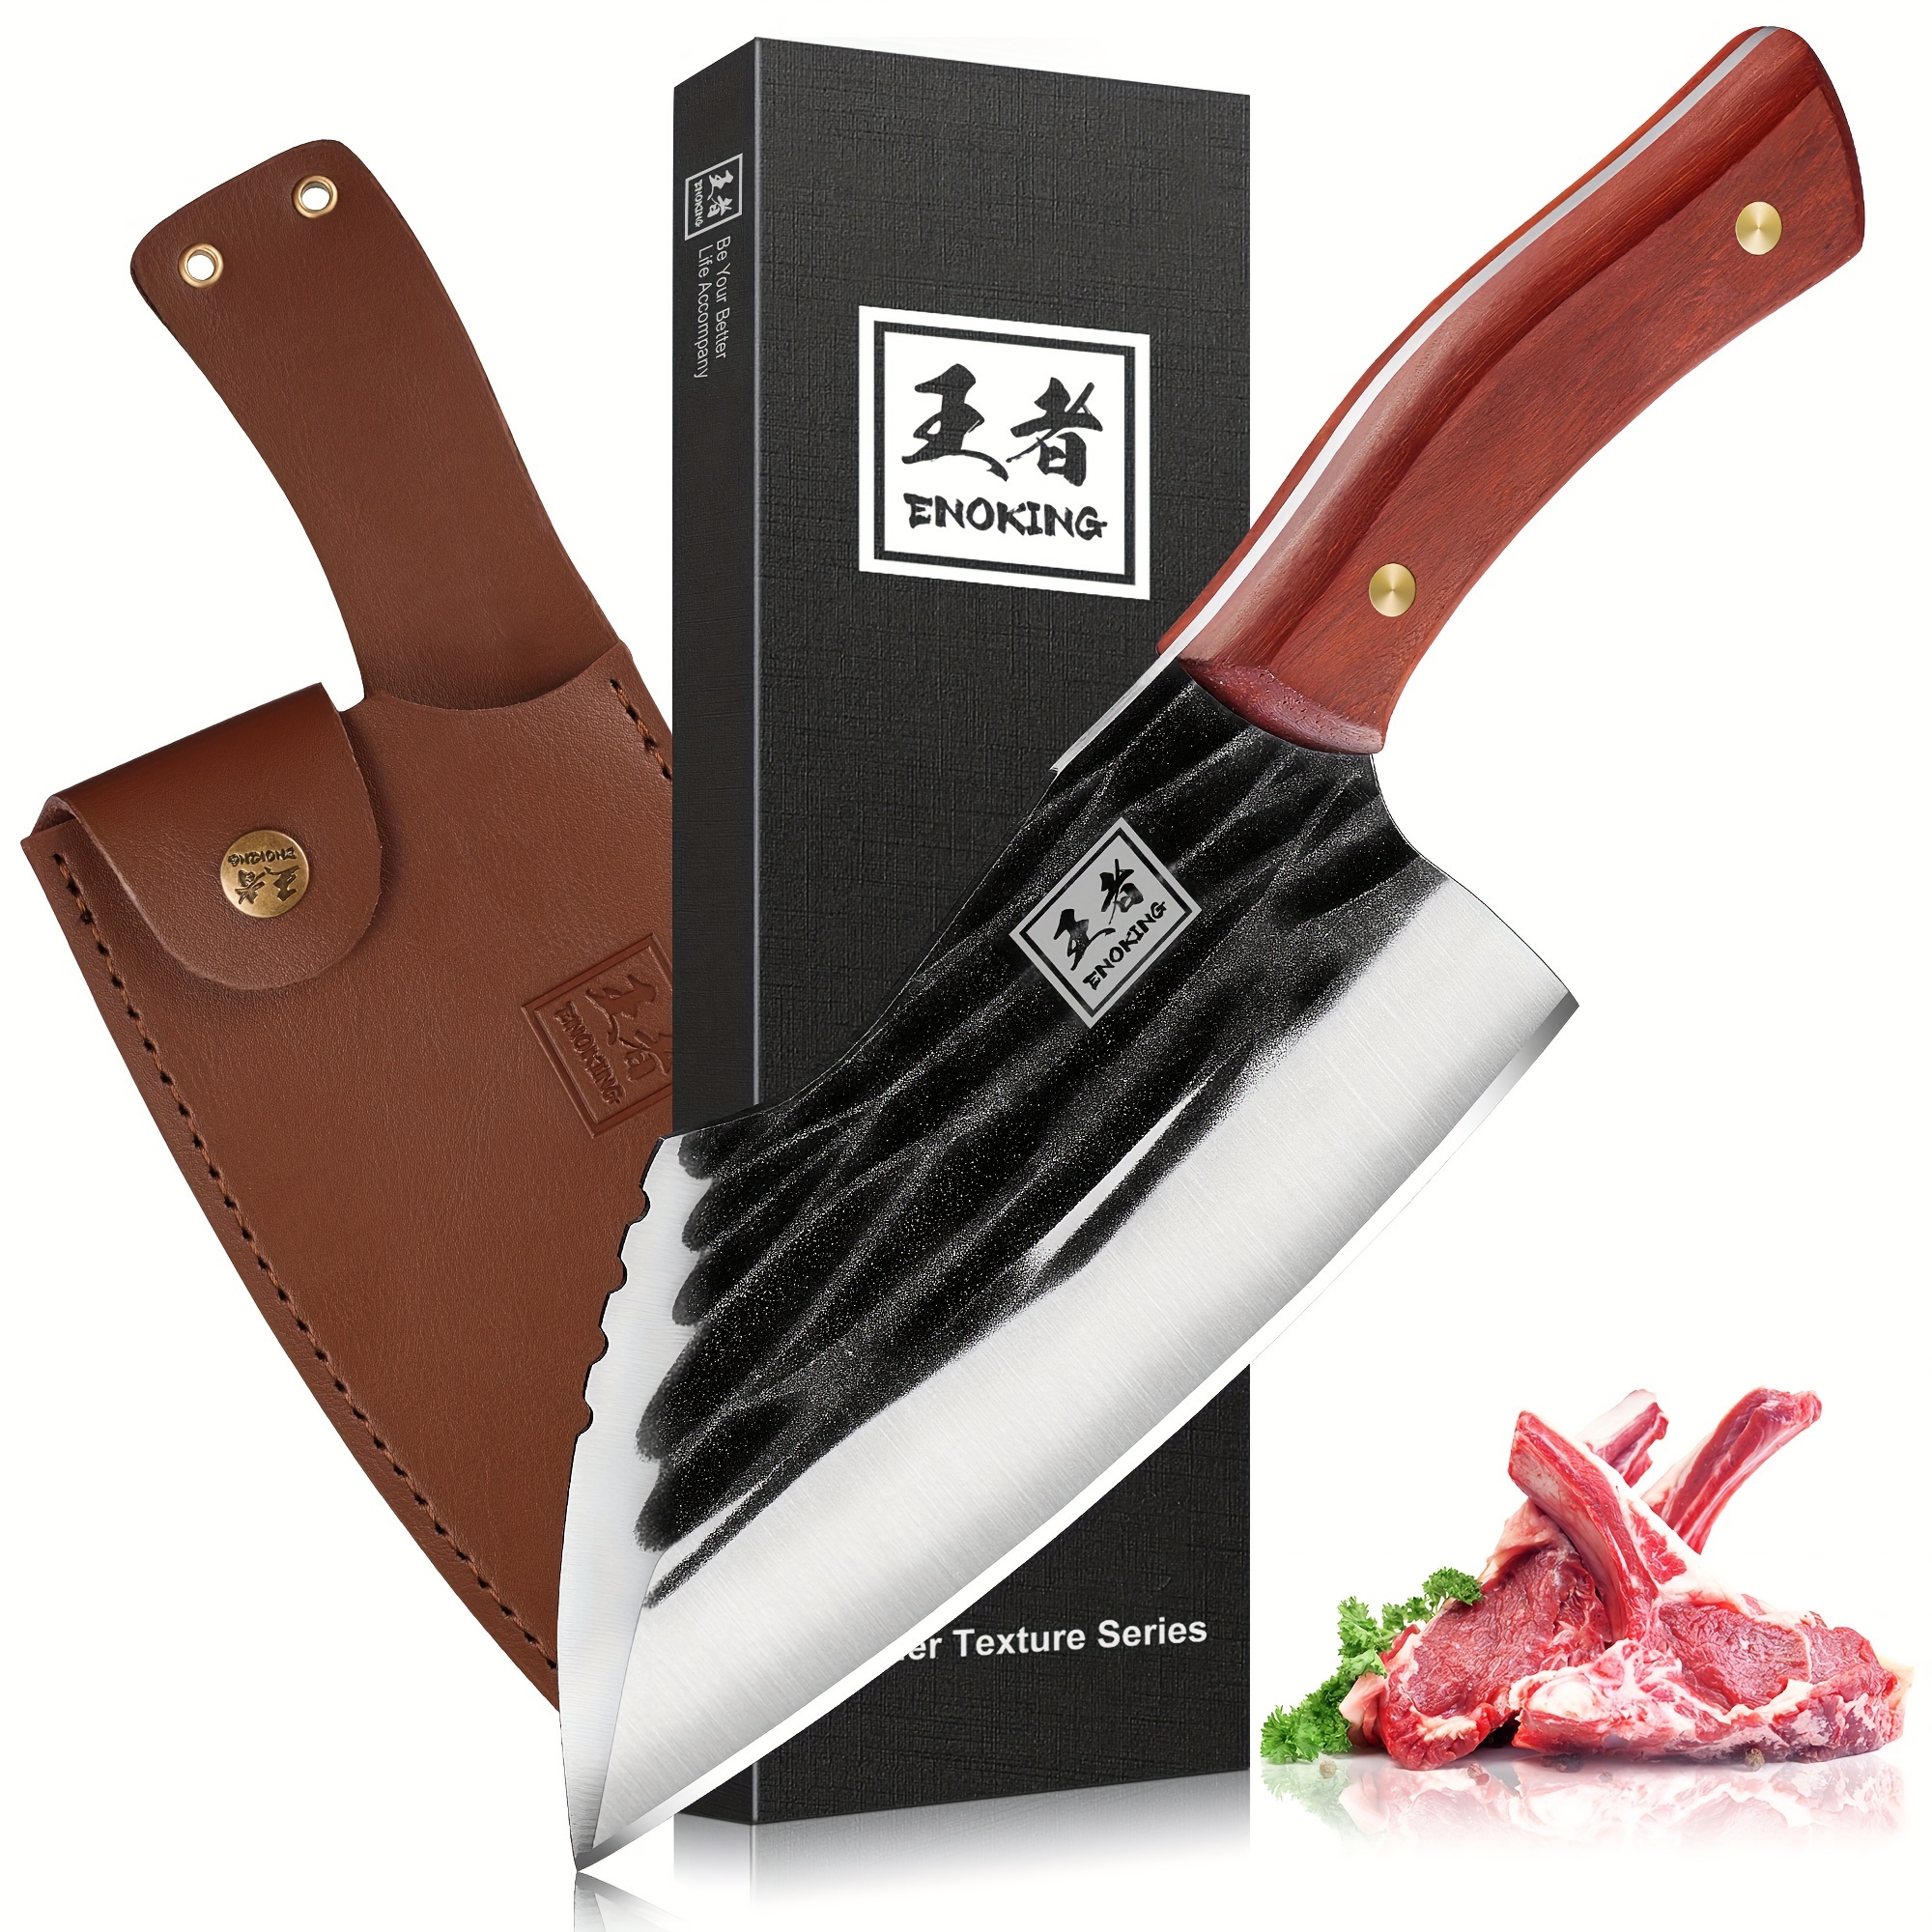 

1pc, Meat Cleaver, 7.1 Inch Cleaver Knife Butcher Knife, Hand Forged Chinese Cleaver With Genuine Leather Sheath, Ultra Sharp Full Tang Meat Knife For Home Kitchen & Outdoor